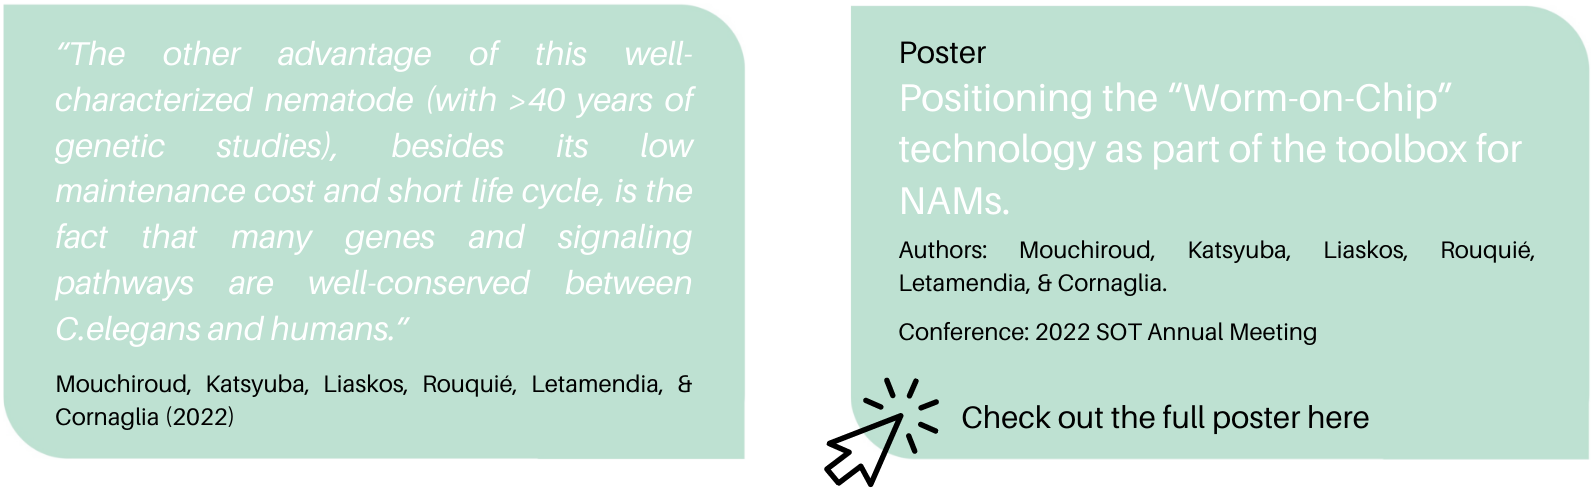 Poster SOT 2022. Positioning the “Worm-on-Chip” technology as part of the toolbox for NAMs